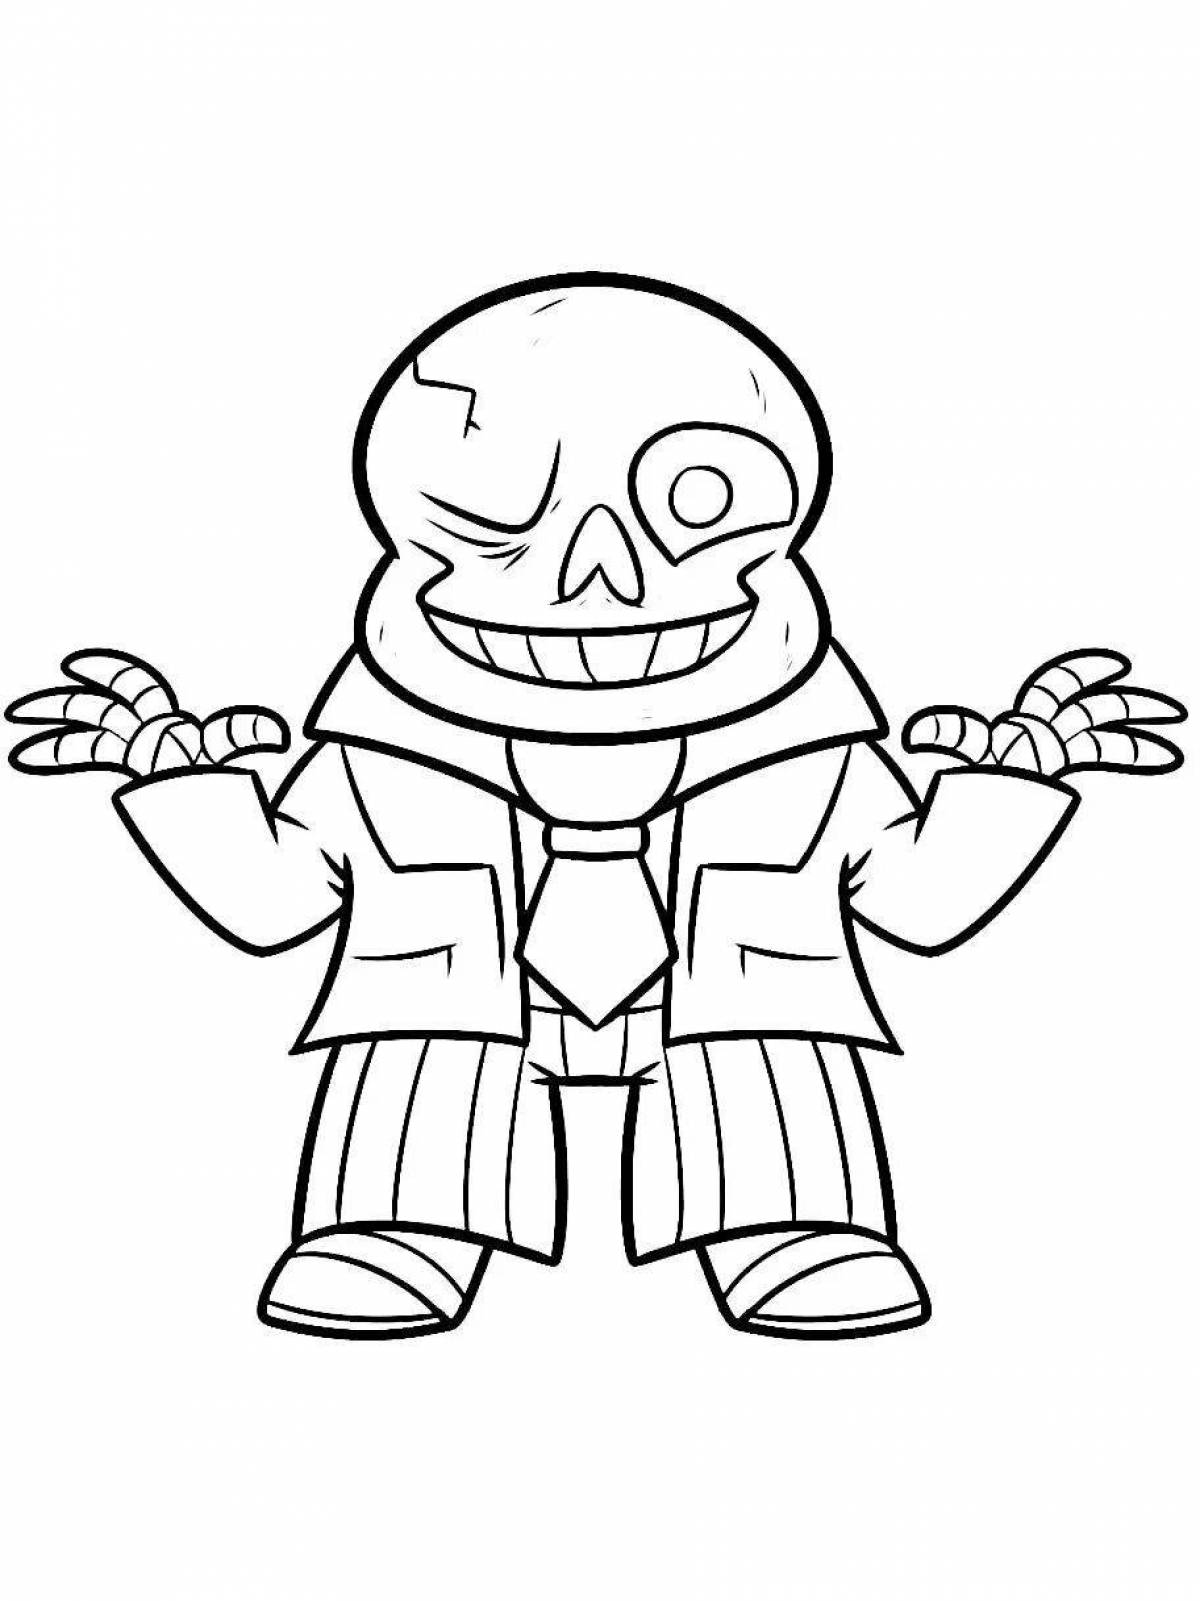 Exciting undertail coloring by numbers